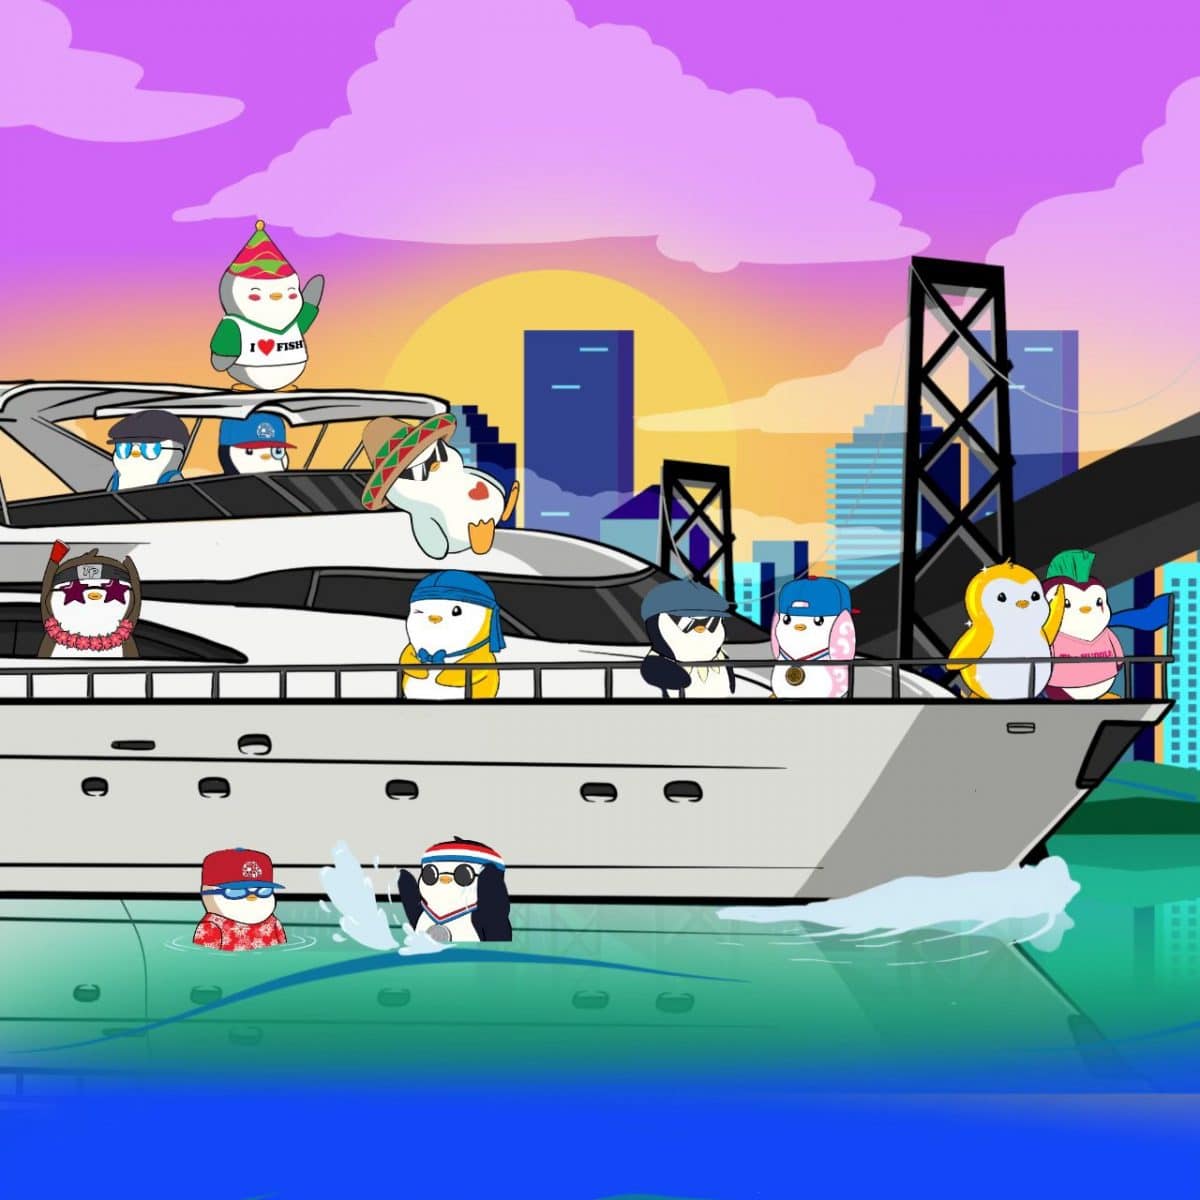 A number of animated penguins stand on a drawn yacht in front of a city during sunset.